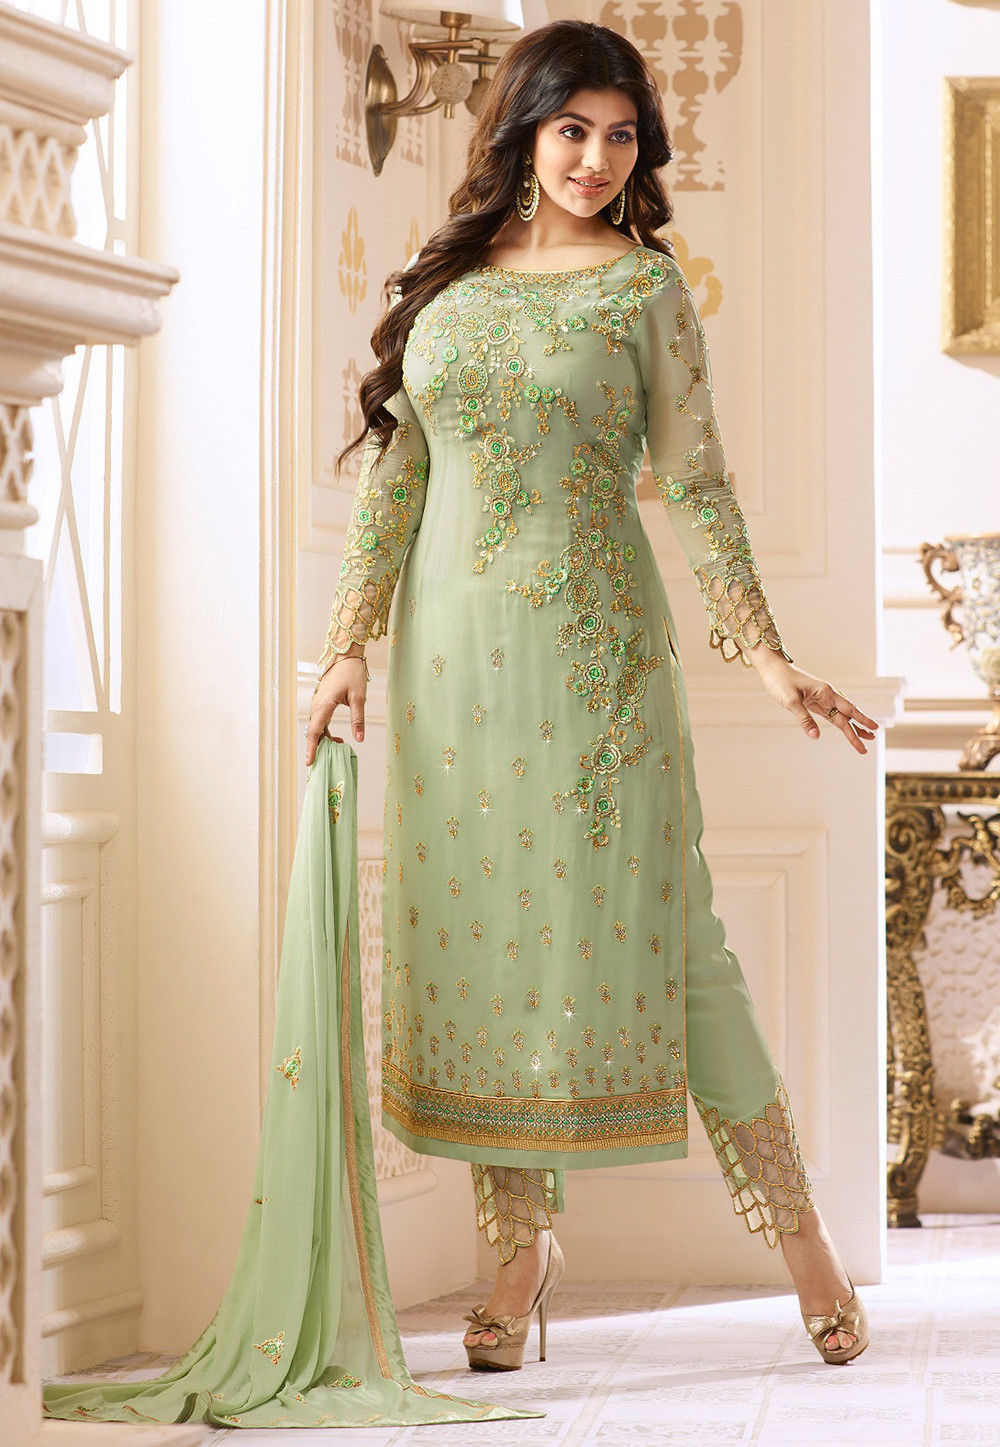 Embroidered Georgette Pakistani Suit In Pastel Green Kch1399,Brown Color Combination For House Exterior